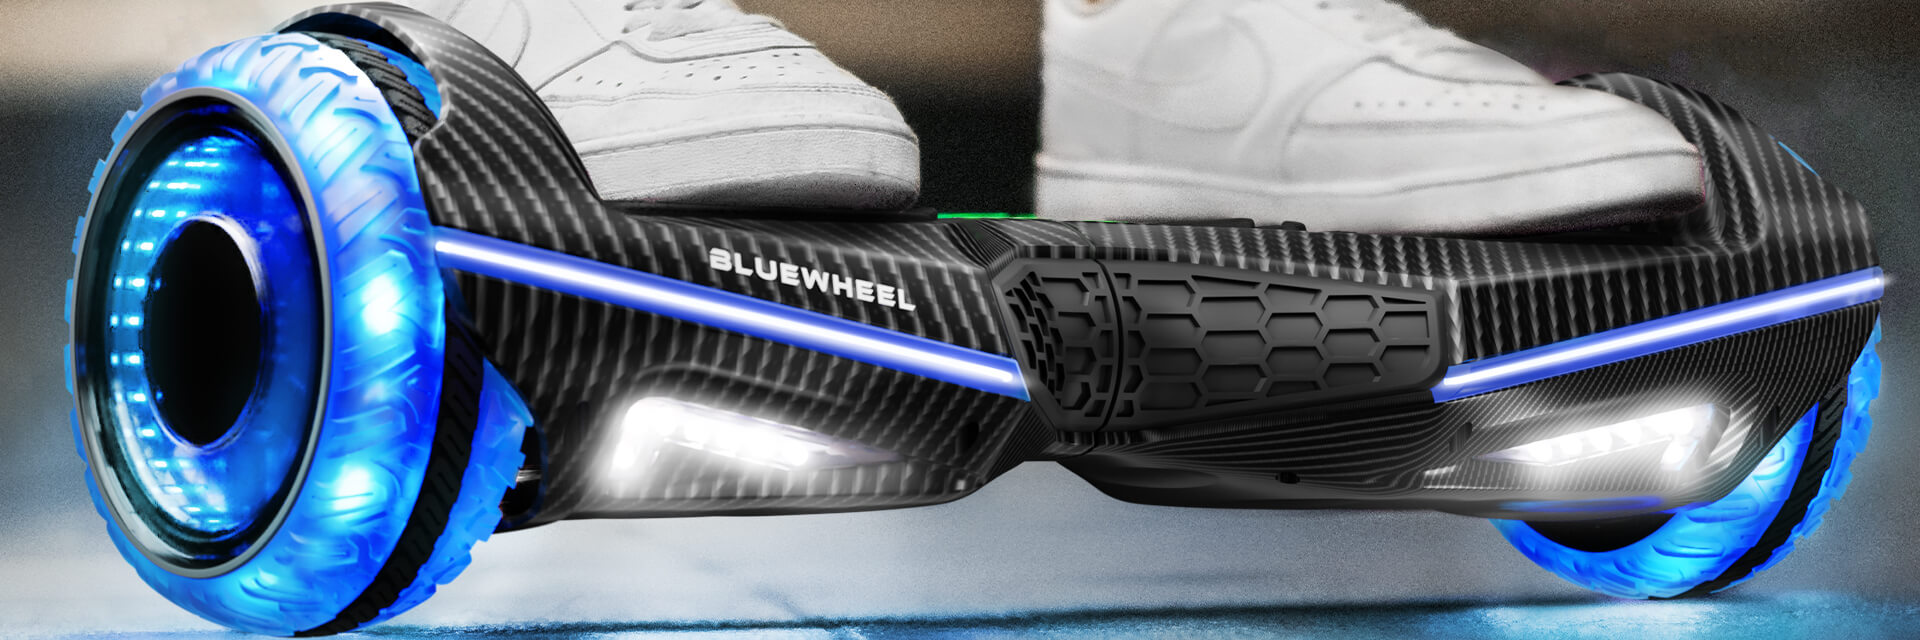 hoverboard-hx360-banner